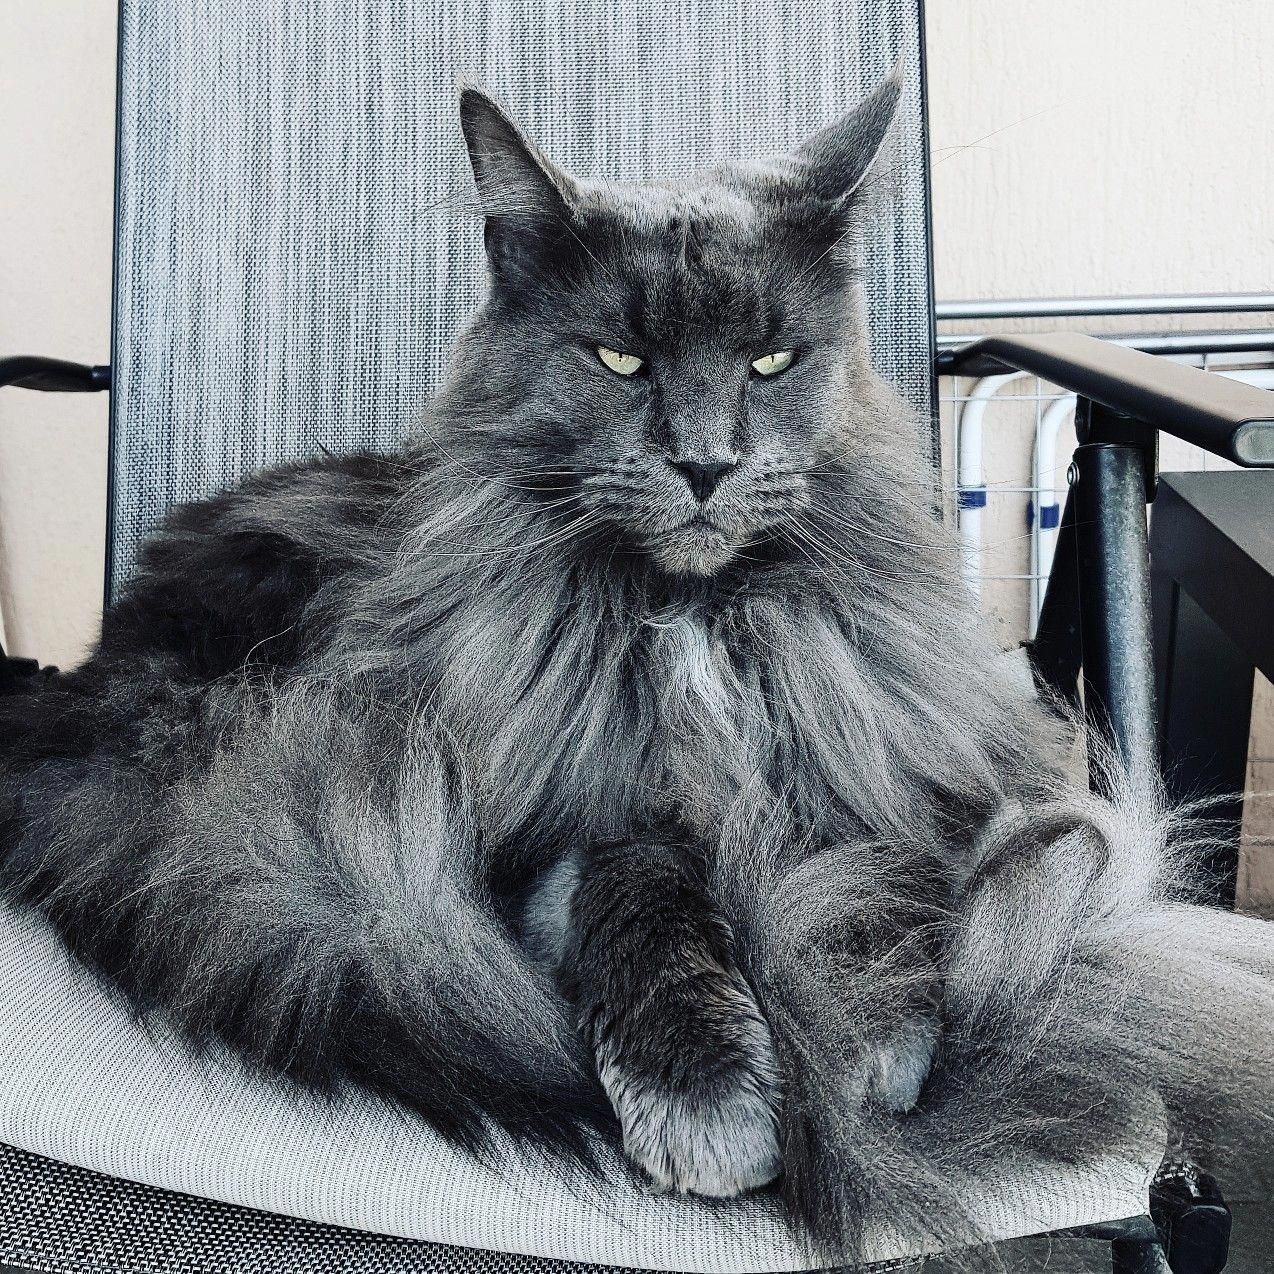 Coon maine blue solid cat cats vanilla mancoon kittens nl big rose beautiful chat choose board